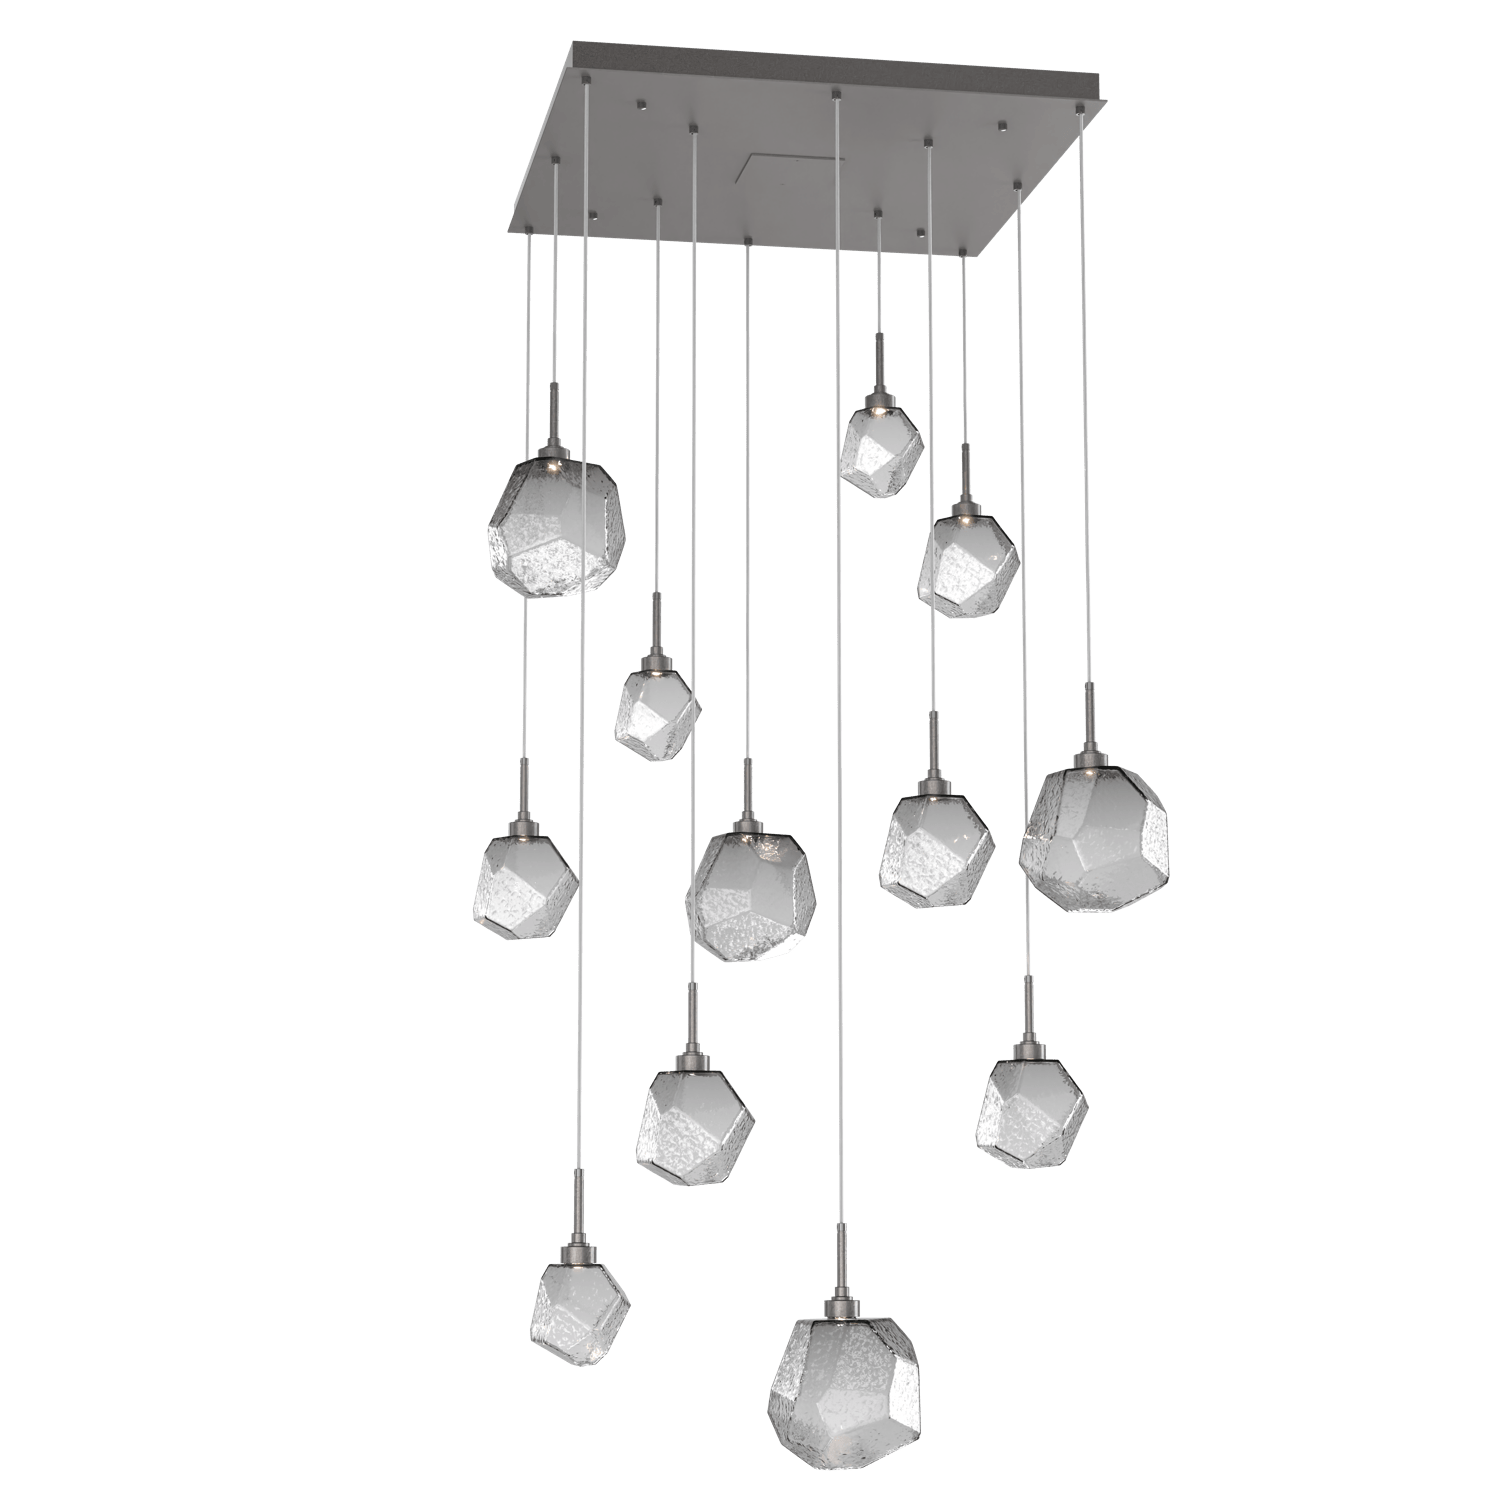 CHB0039-12-GP-S-Hammerton-Studio-Gem-12-light-square-pendant-chandelier-with-graphite-finish-and-smoke-blown-glass-shades-and-LED-lamping